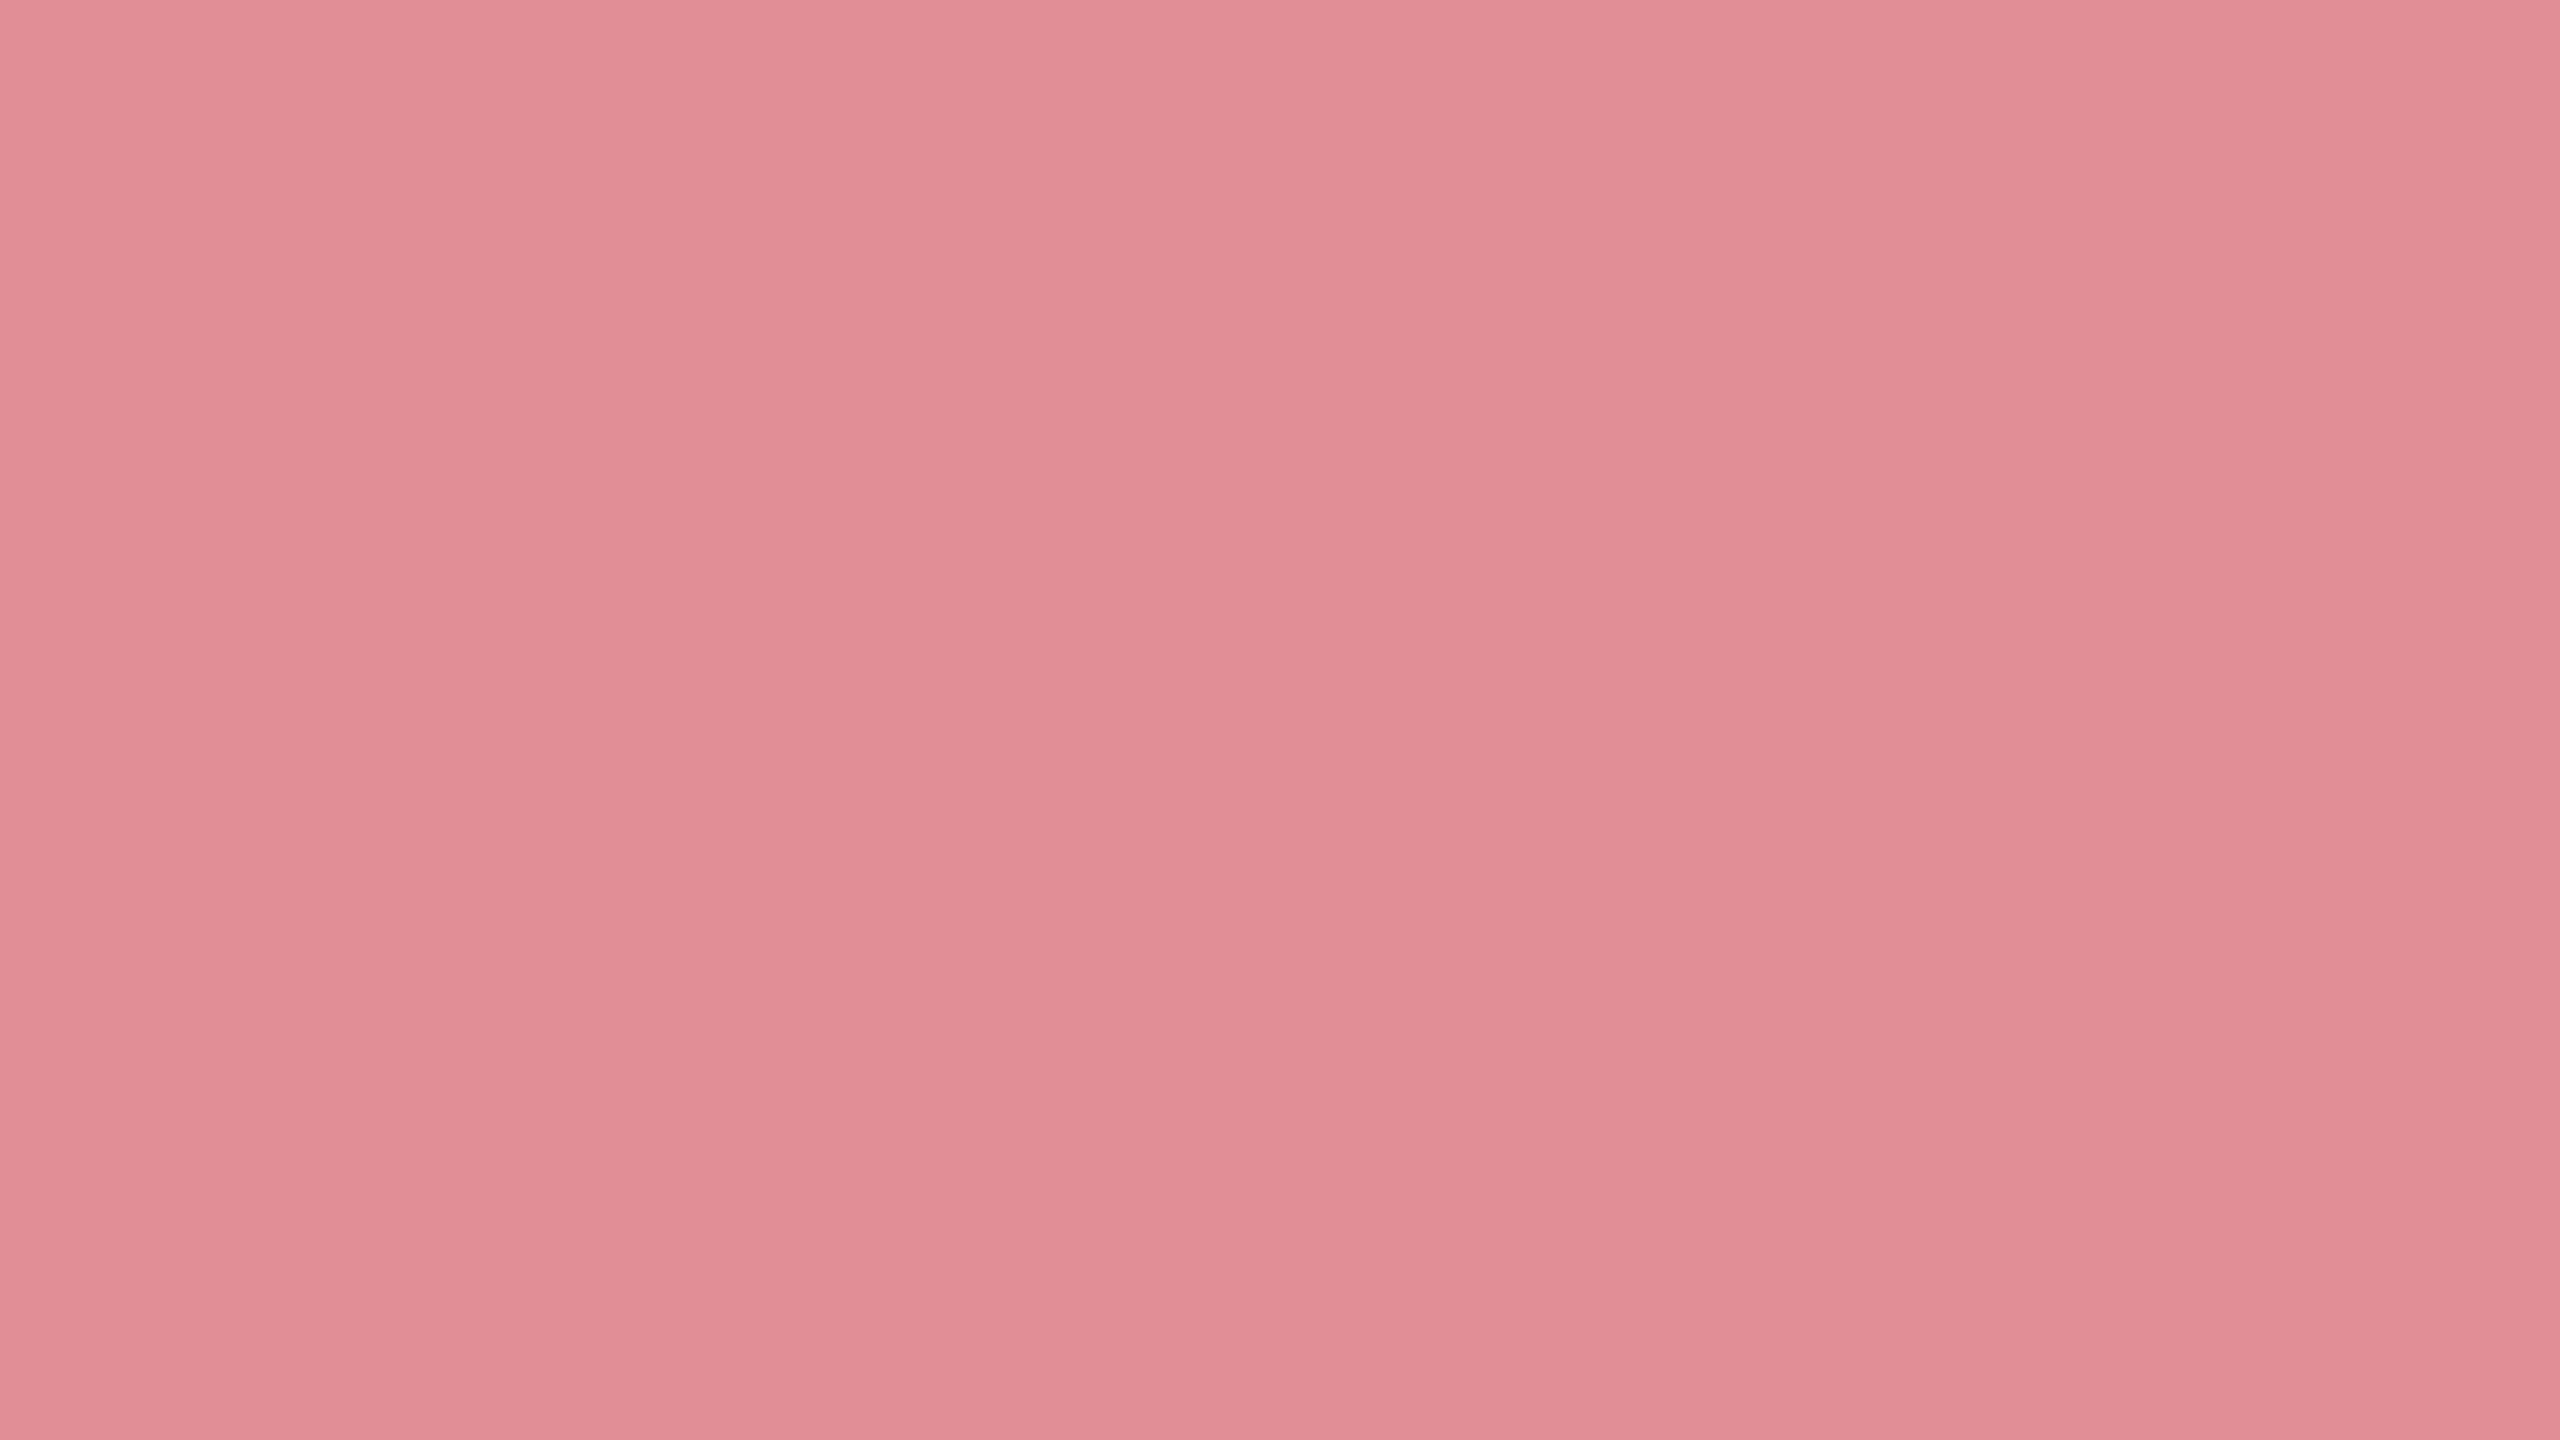 2560x1440 Ruddy Pink Solid Color Background